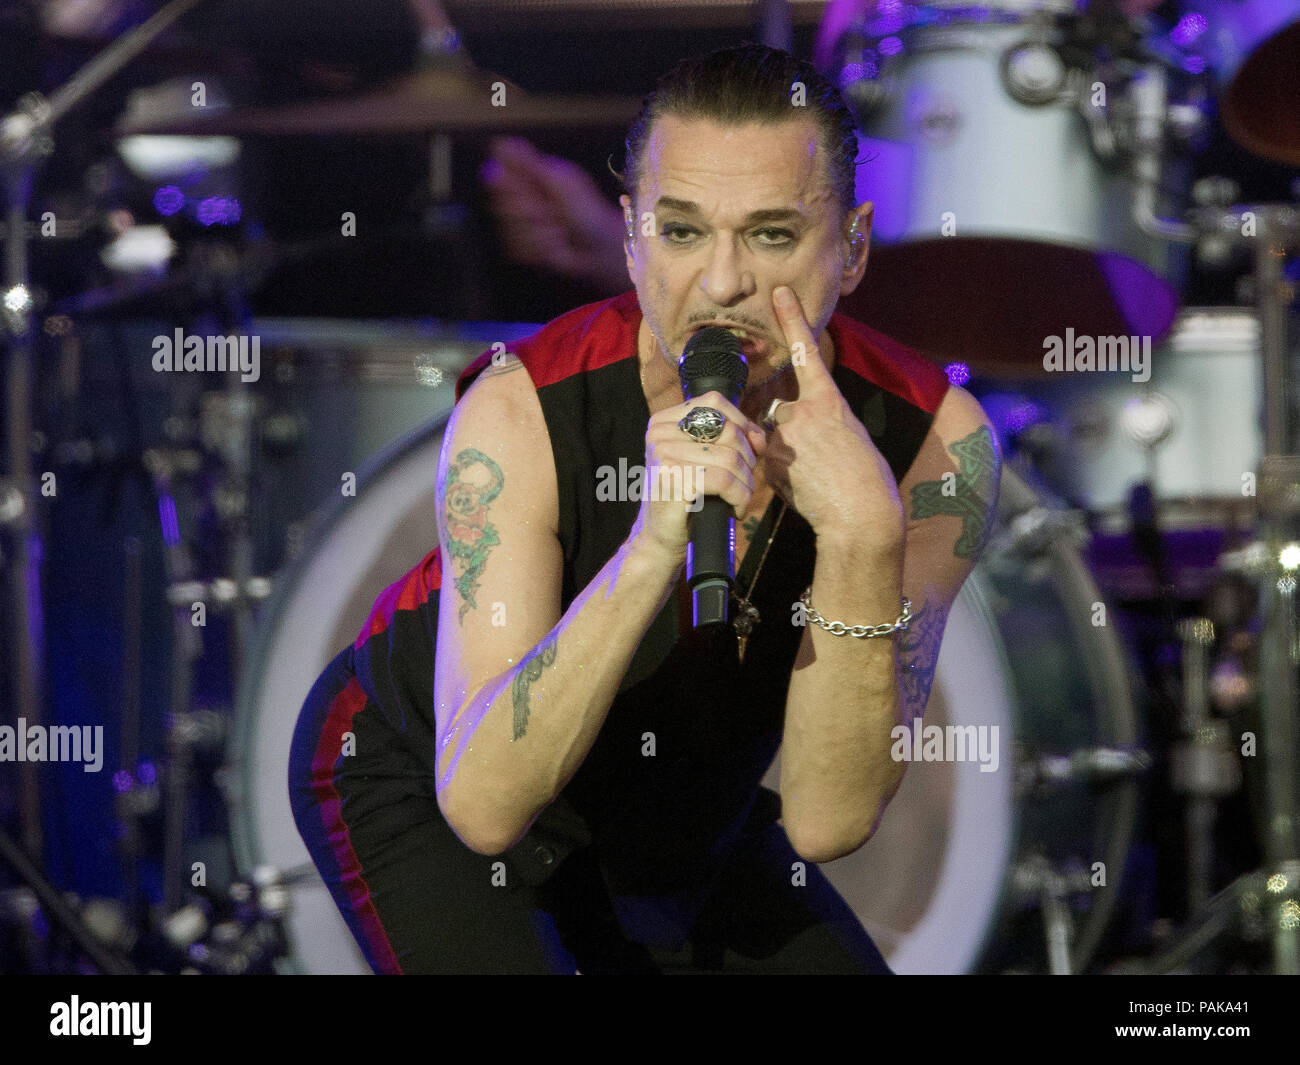 Berlin, Germany. 23rd July, 2018. Dave Gahan, singer and frontman of the band 'Depeche Mode' singing during the last concert of the band's 'Global Spirit' world tour in the Waldbuehne. Credit: Soeren Stache/dpa/Alamy Live News Stock Photo